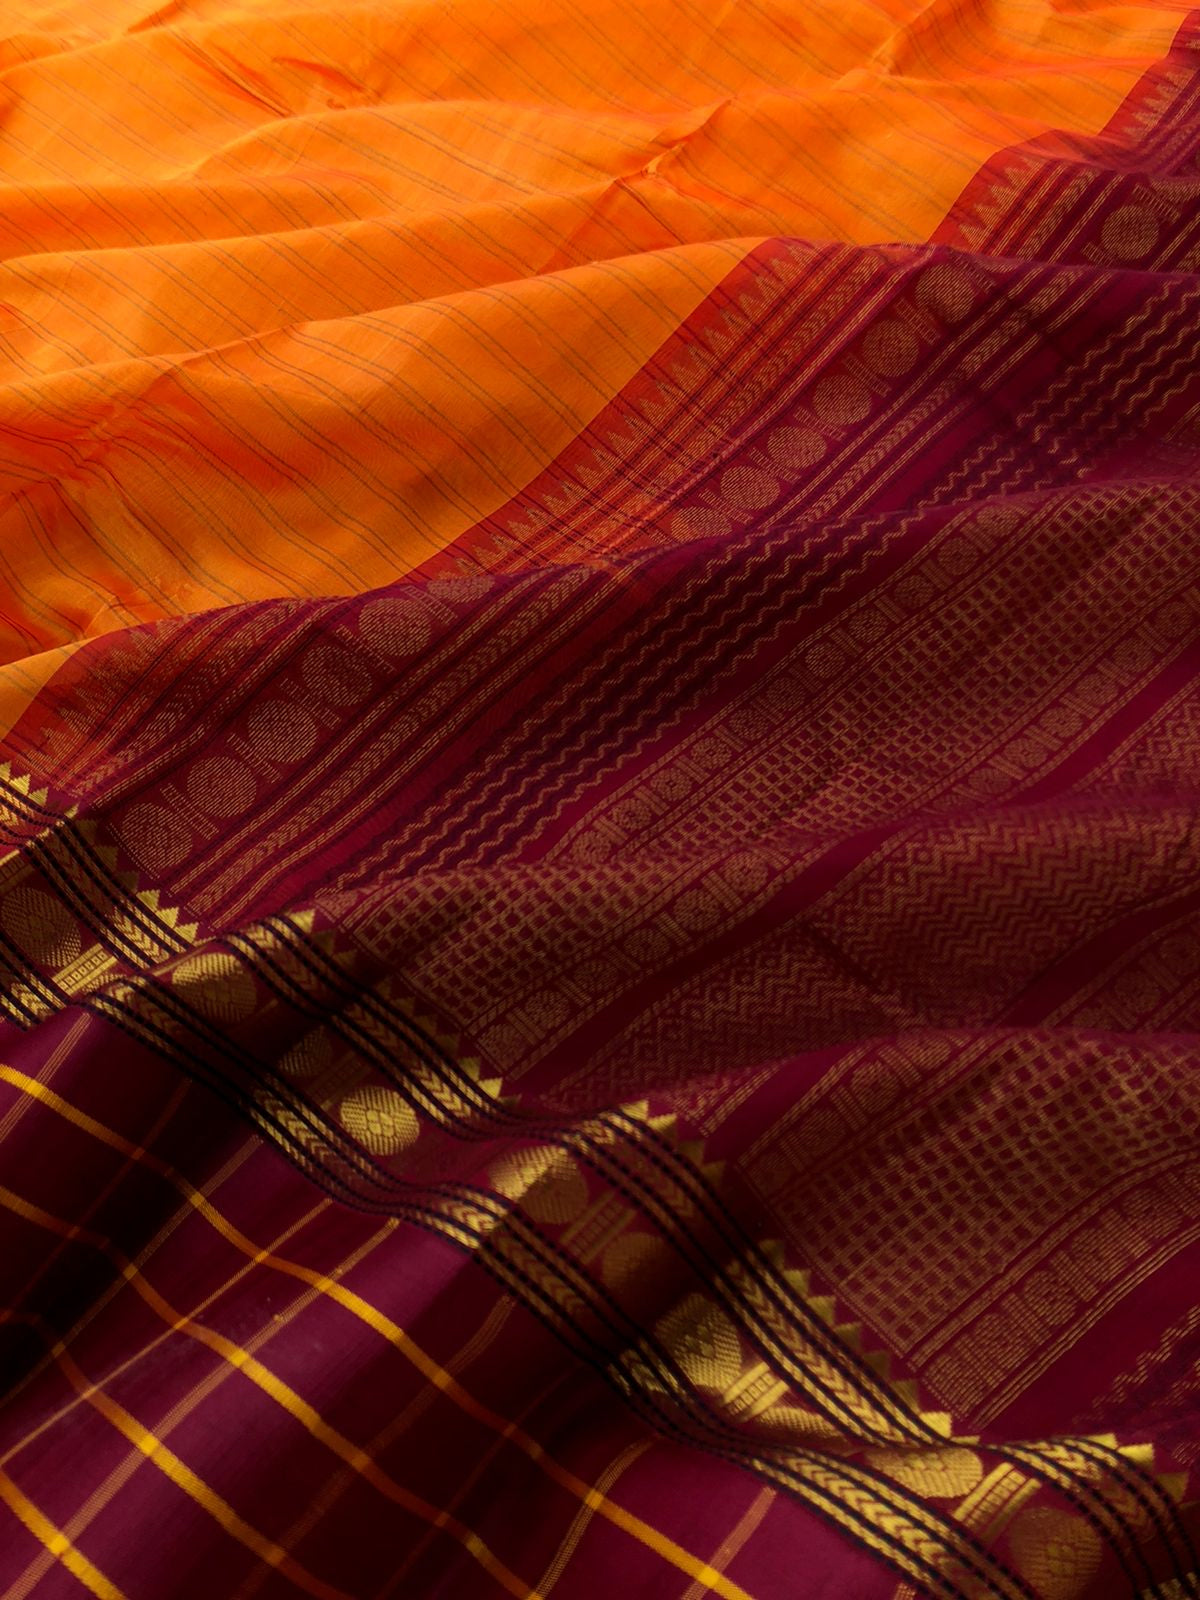 Divyam - Korvai Silk Cotton with Pure Silk Woven Borders - sun set orange and maroon with stripes woven body and check woven borders